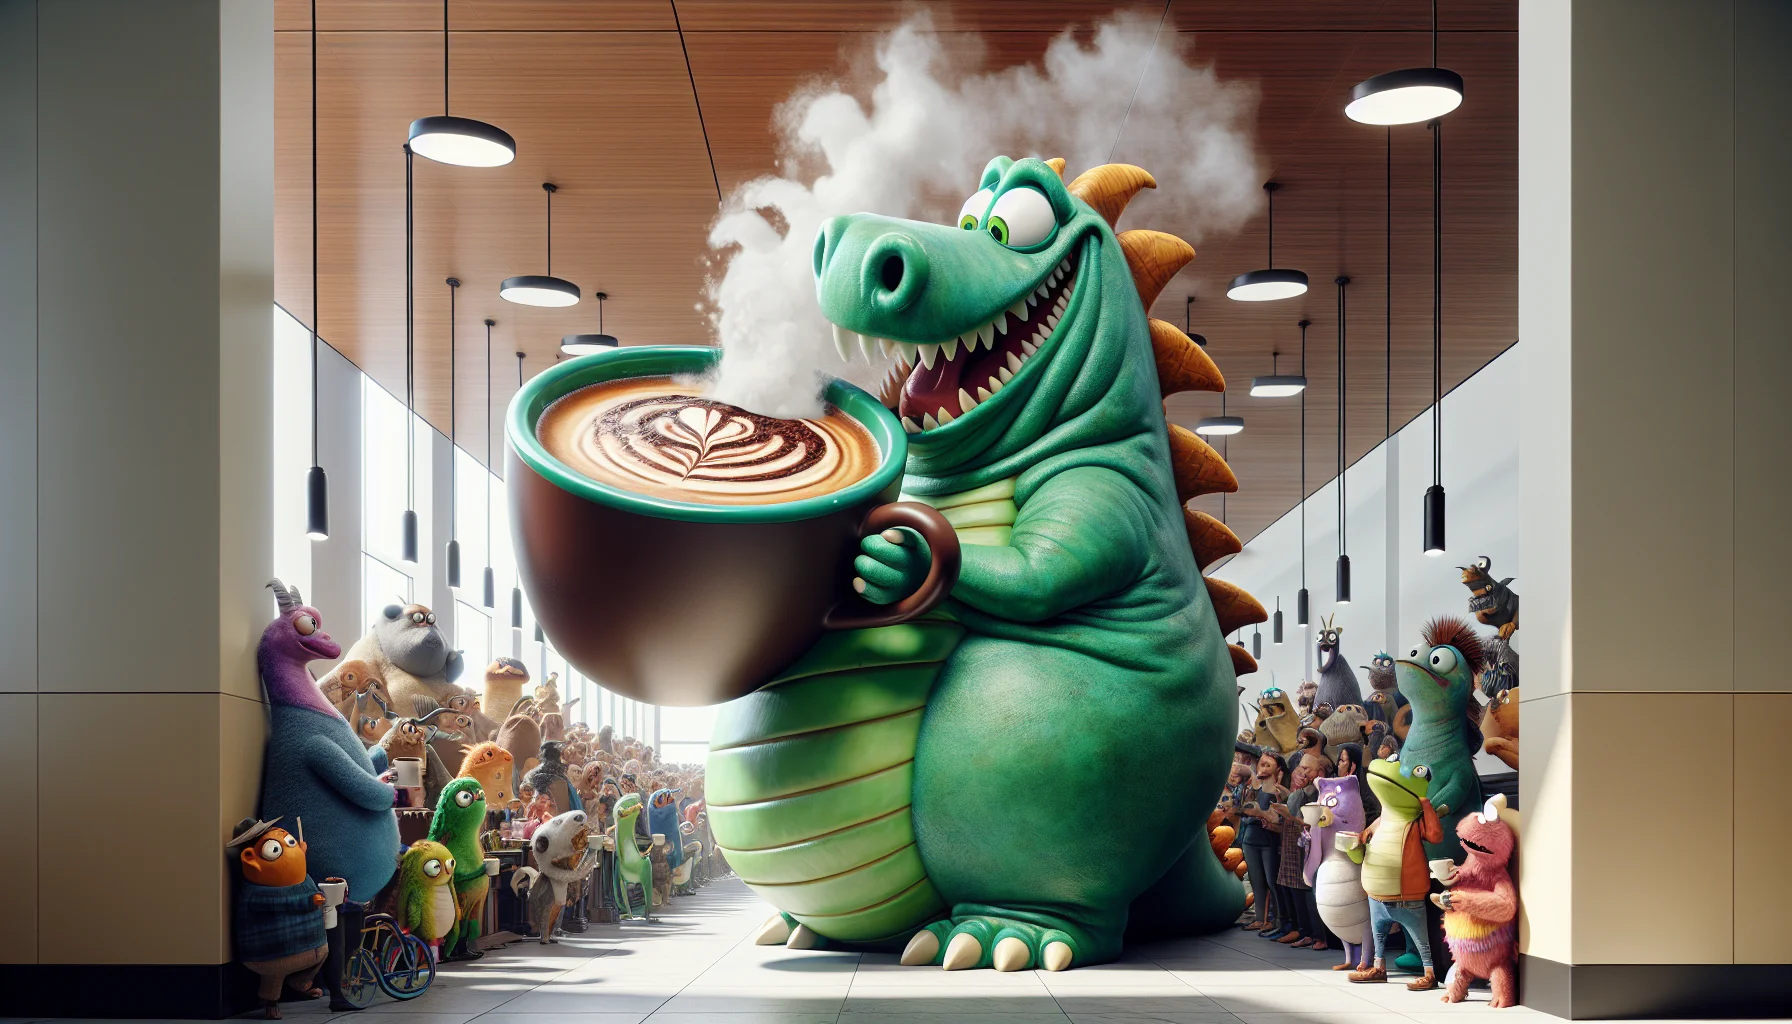 Create a vivid and realistic image that humorously encourages people to savor a breve latte. The scenario involves a plump and cheerful cartoon dragon, of a brilliant green hue, sipping on a frothy breve latte from a towering, oversized coffee mug. The dragon is situated in an ultra-modern, bustling coffee shop filled with imaginative creatures of different species, all lined up and visibly excited to get their own lattes. The dragon, wearing a goofy grin, is struggling to handle the mammoth size of the latte mug, causing puffs of smoke to escape from its nostrils in consternation.